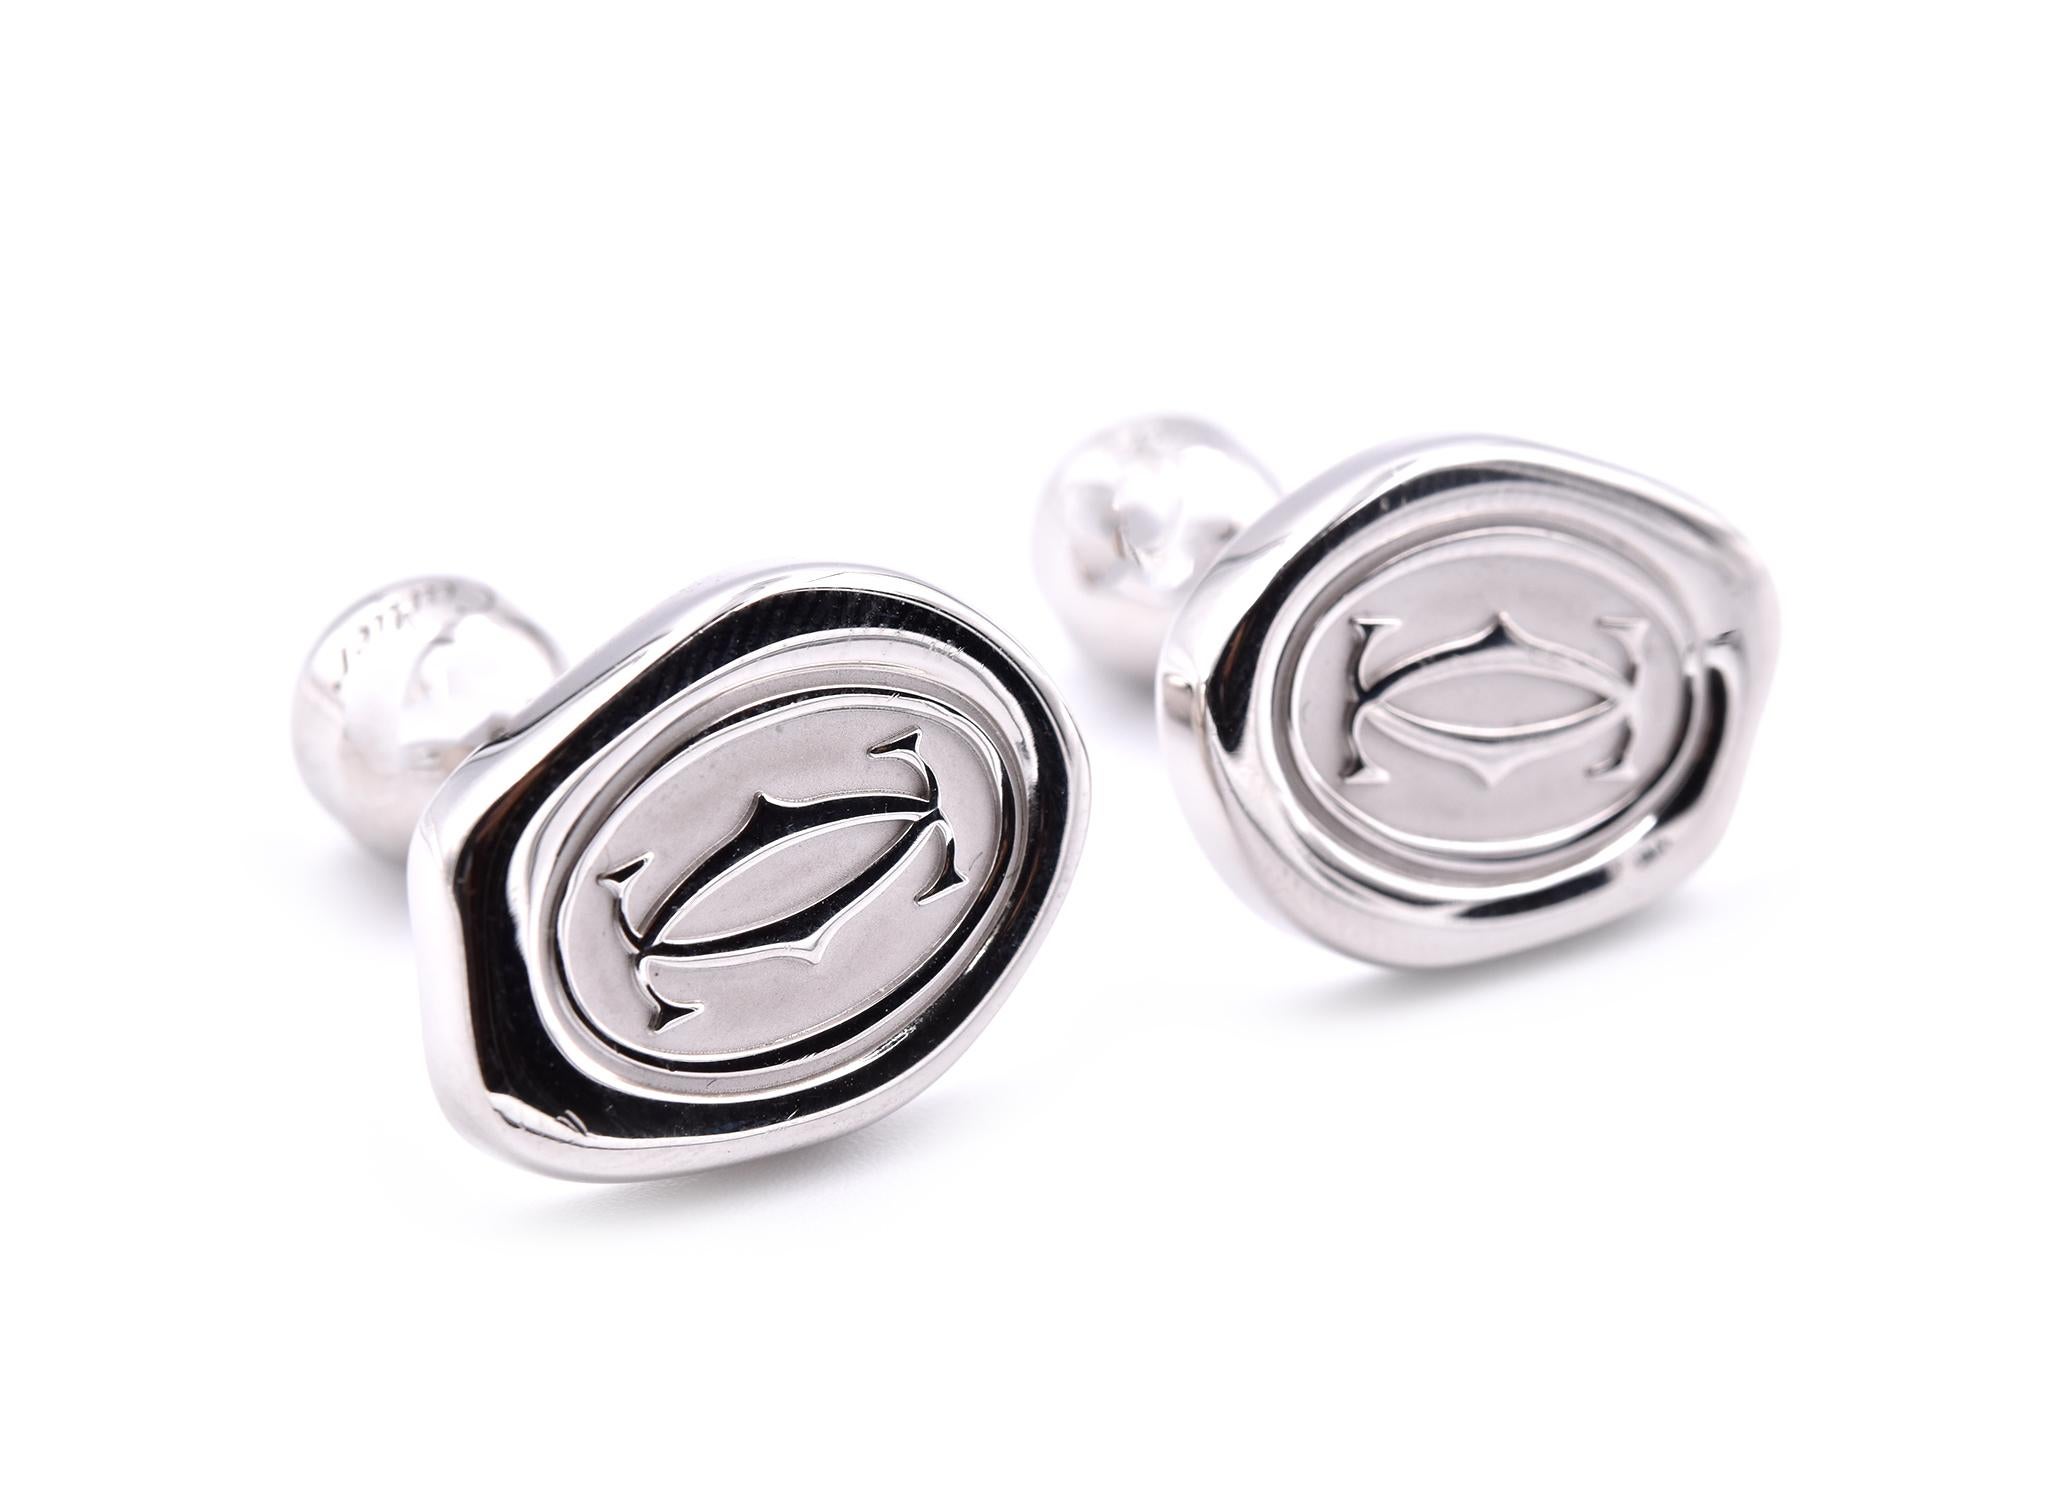 Designer: Cartier
Material: sterling silver
Dimensions: cufflinks are approximately 21mm by 15.88mm
Weight: 25.10 grams


Inner/Outer Box Included
